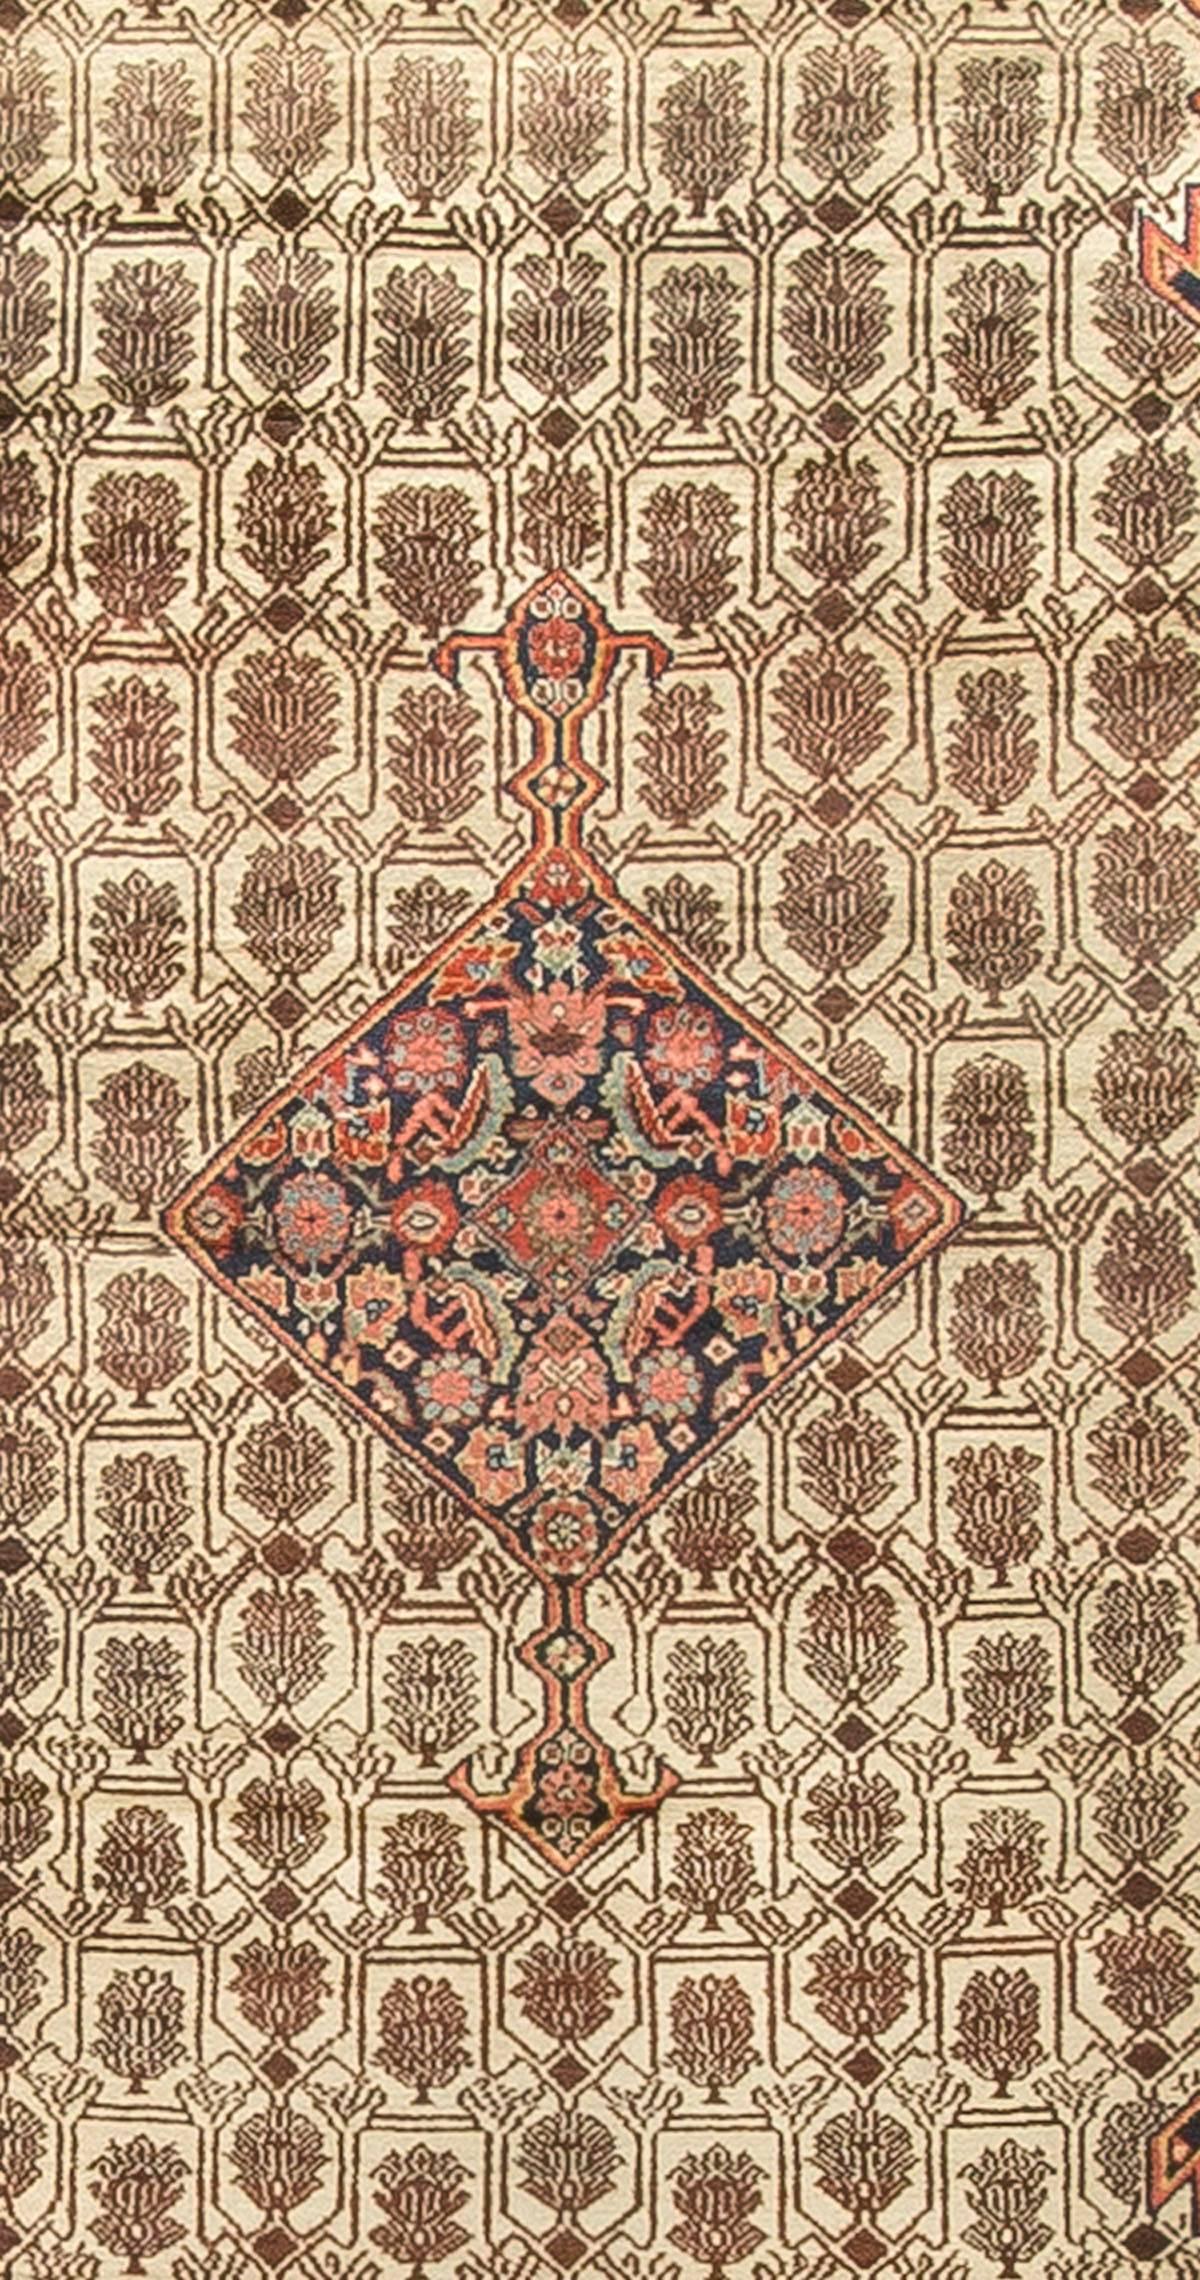 Hand-Knotted Antique Persian Serab Camel Hair Rug Runner circa 1900  5' x 11' For Sale